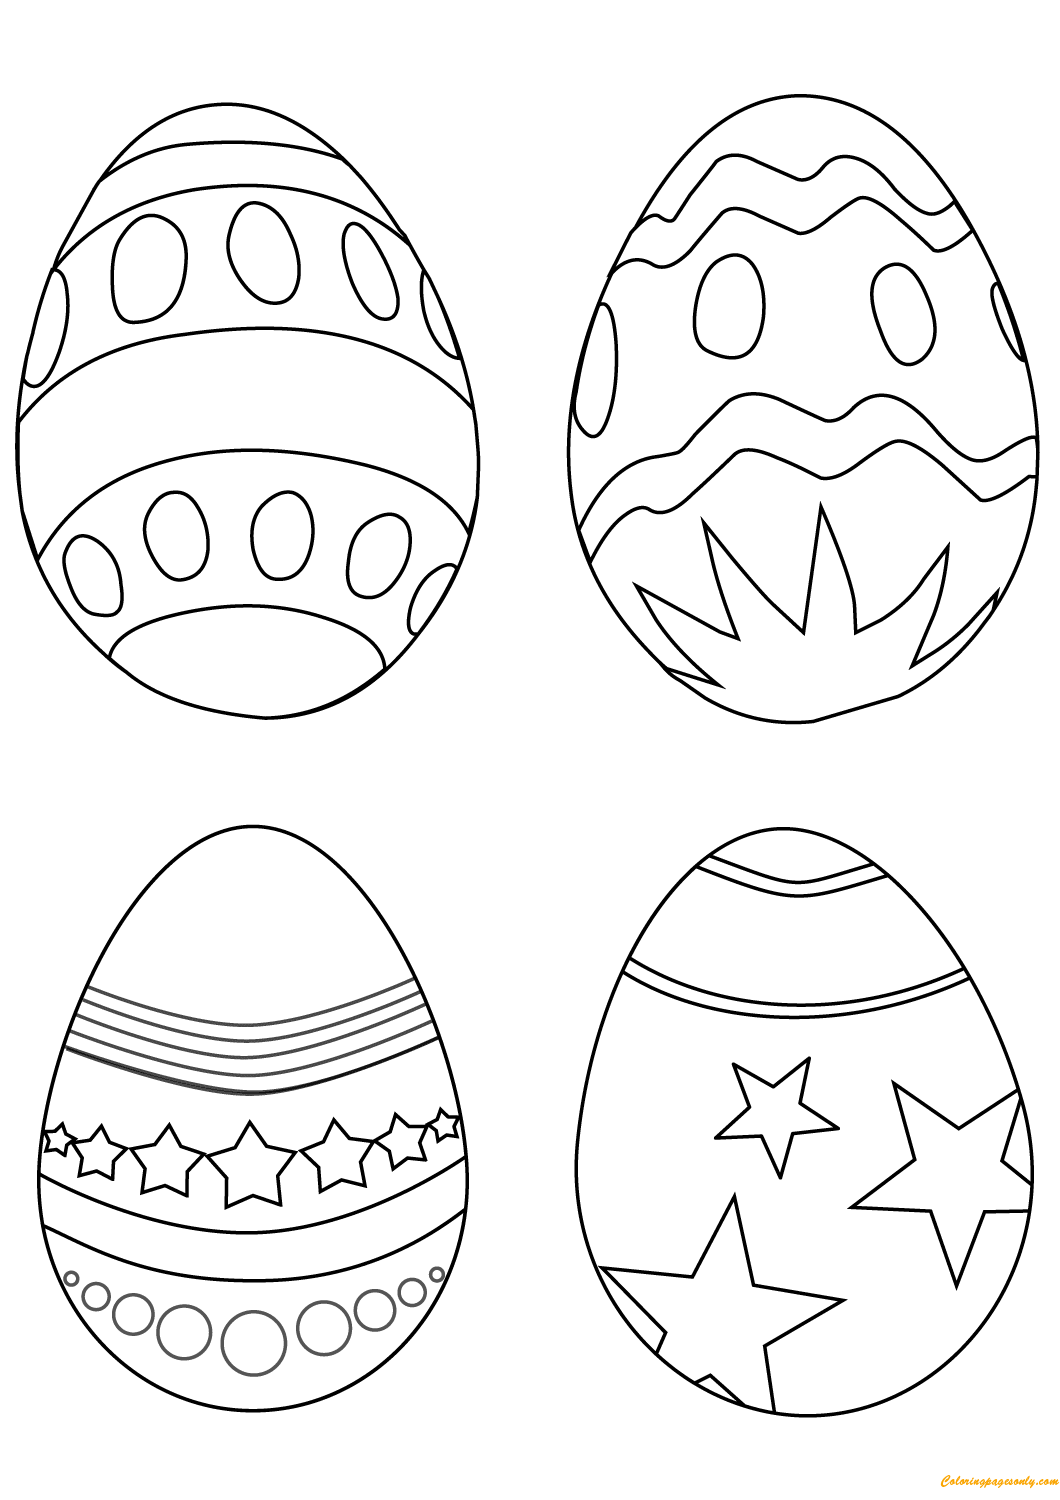 Simple Easter Eggs Coloring Page - Free Coloring Pages Online